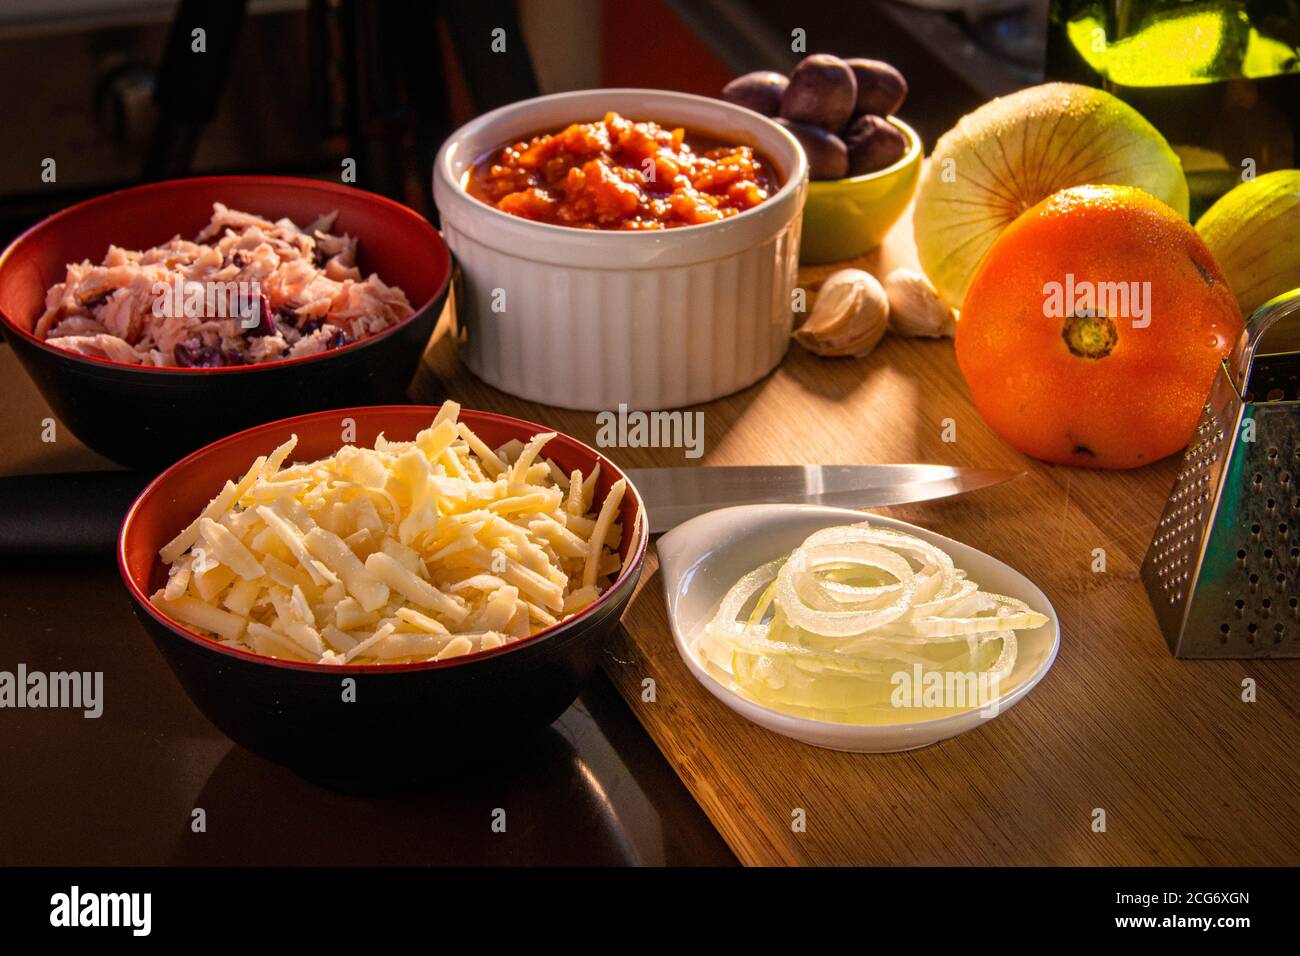 Bowls of pizza toppings in a kitchen Stock Photo